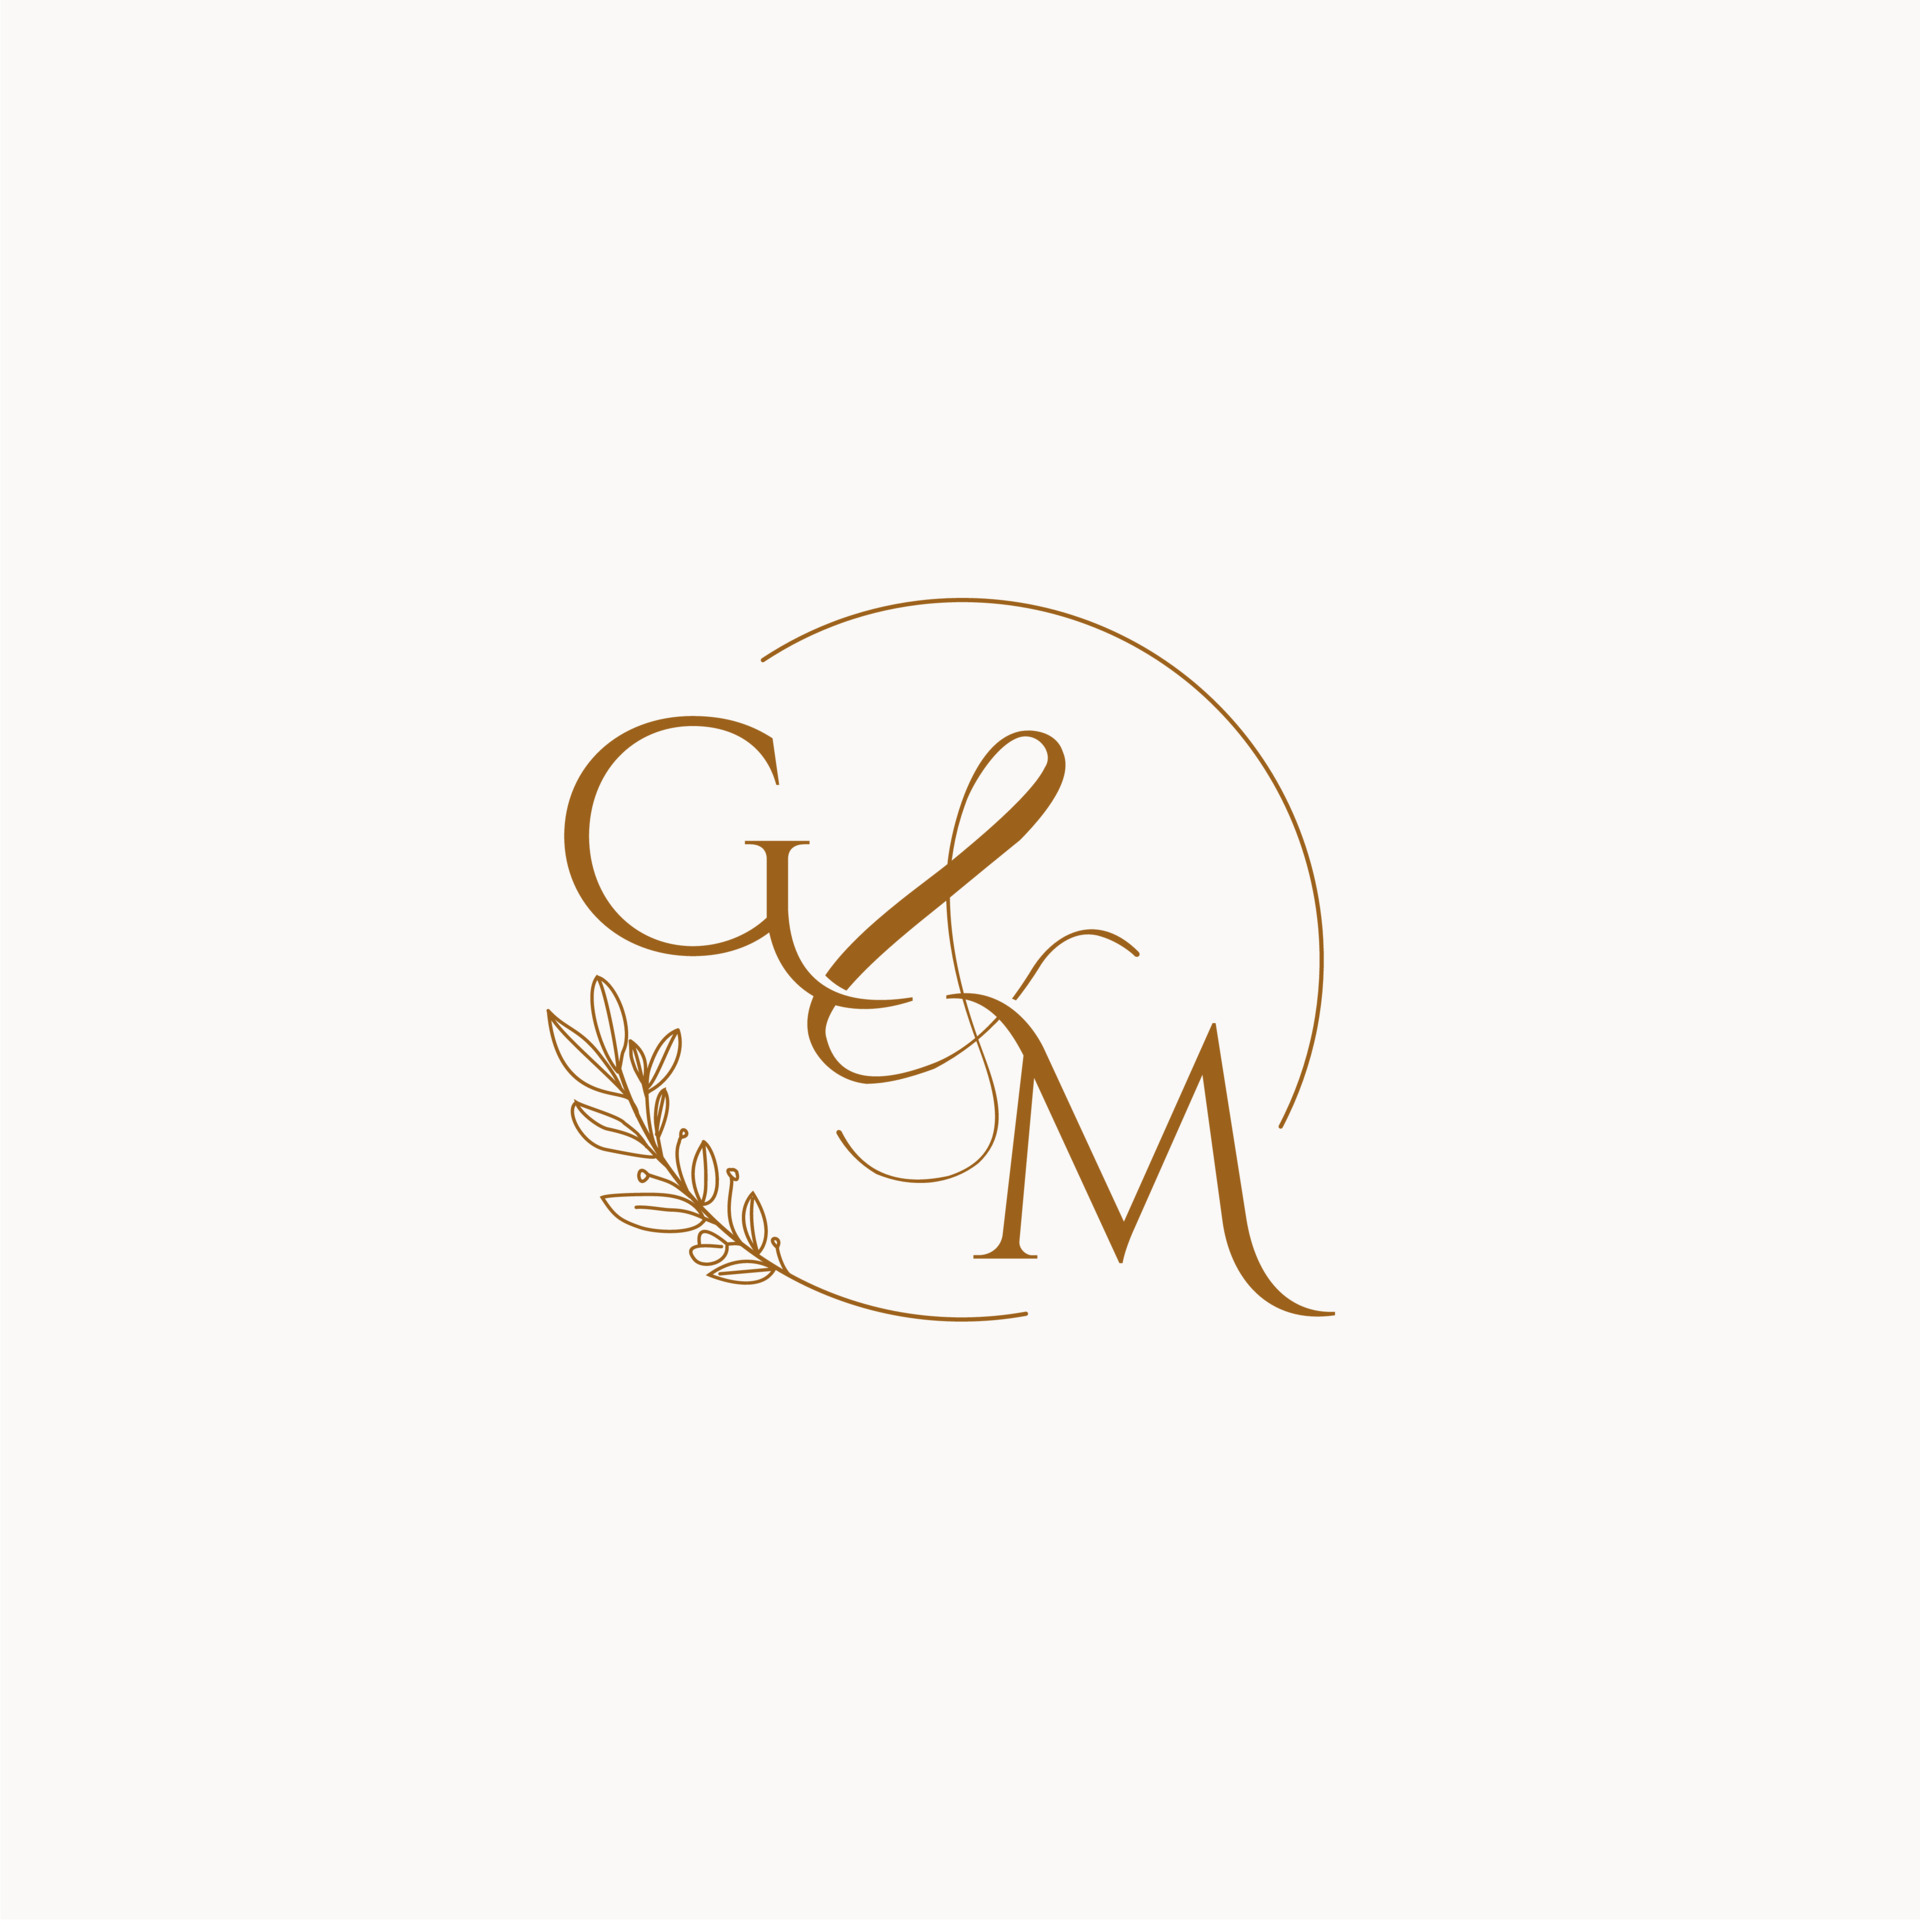 Initial GM letters Decorative luxury wedding logo - stock vector 3145213